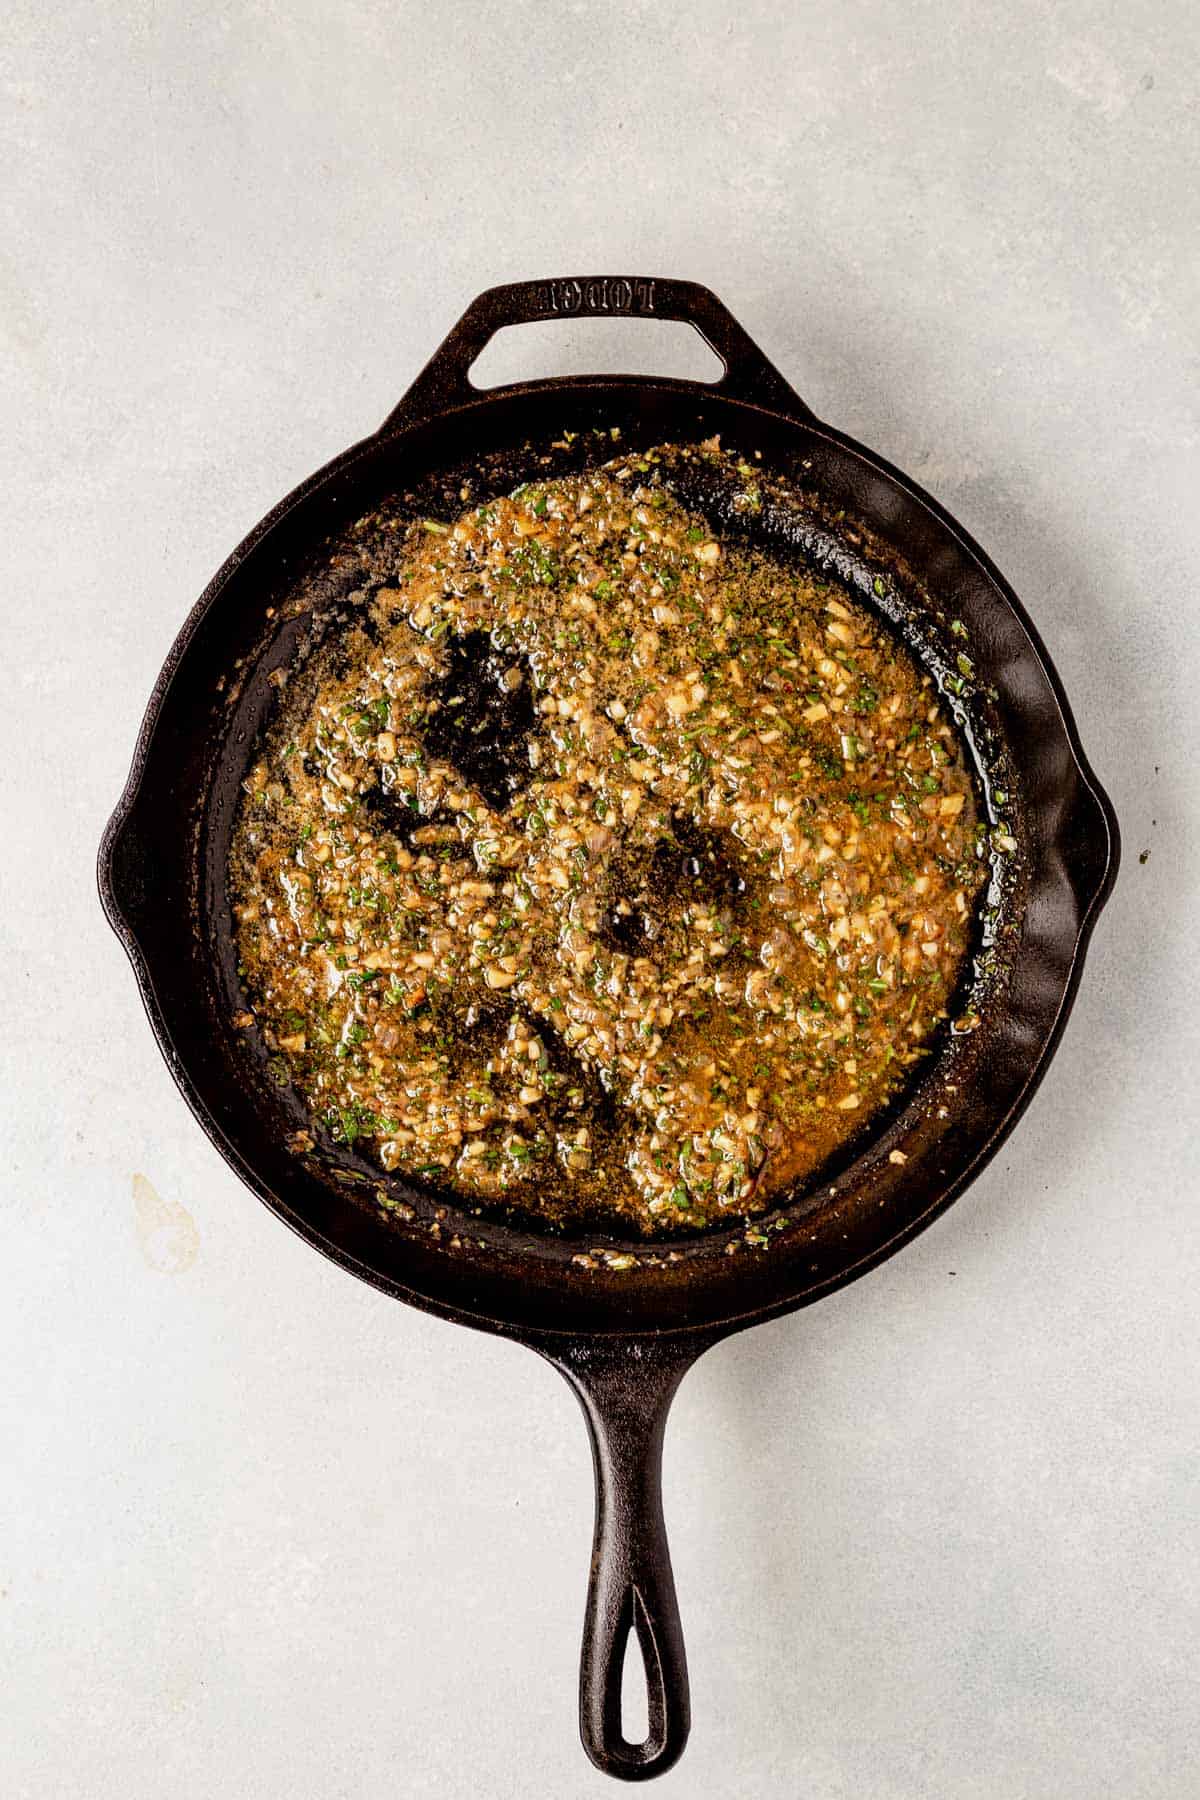 minced shallots and herbs in a skillet